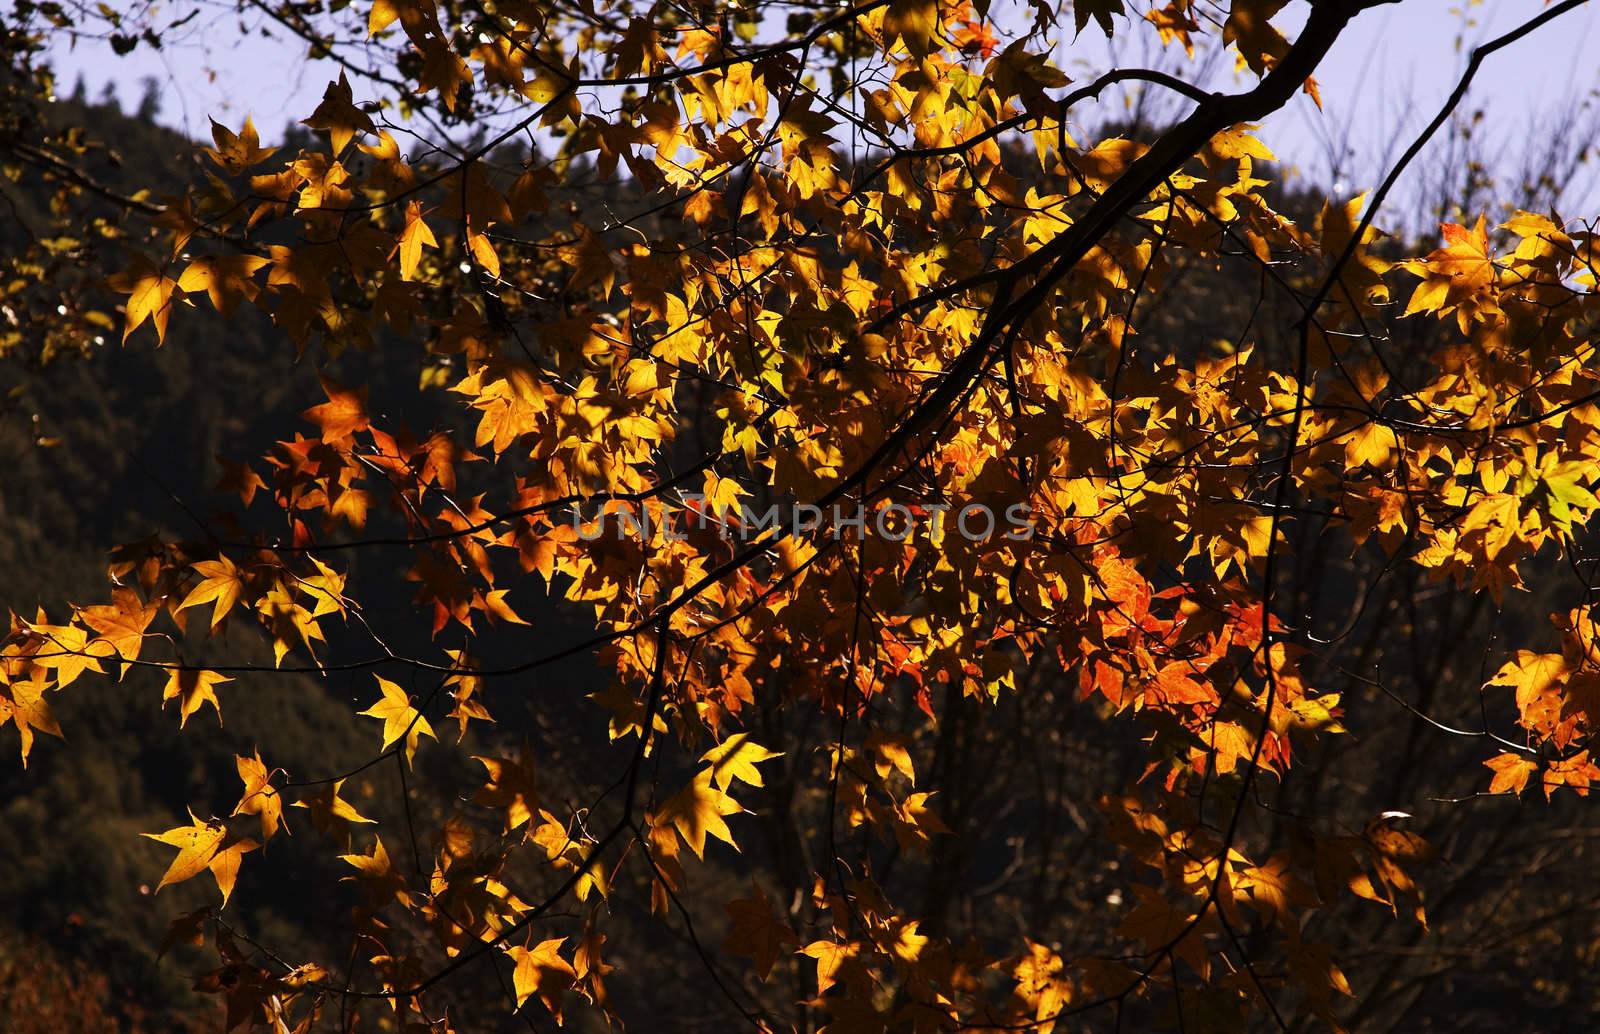 Leaves shining with golden and yellow bright, looks so beautiful and rich.